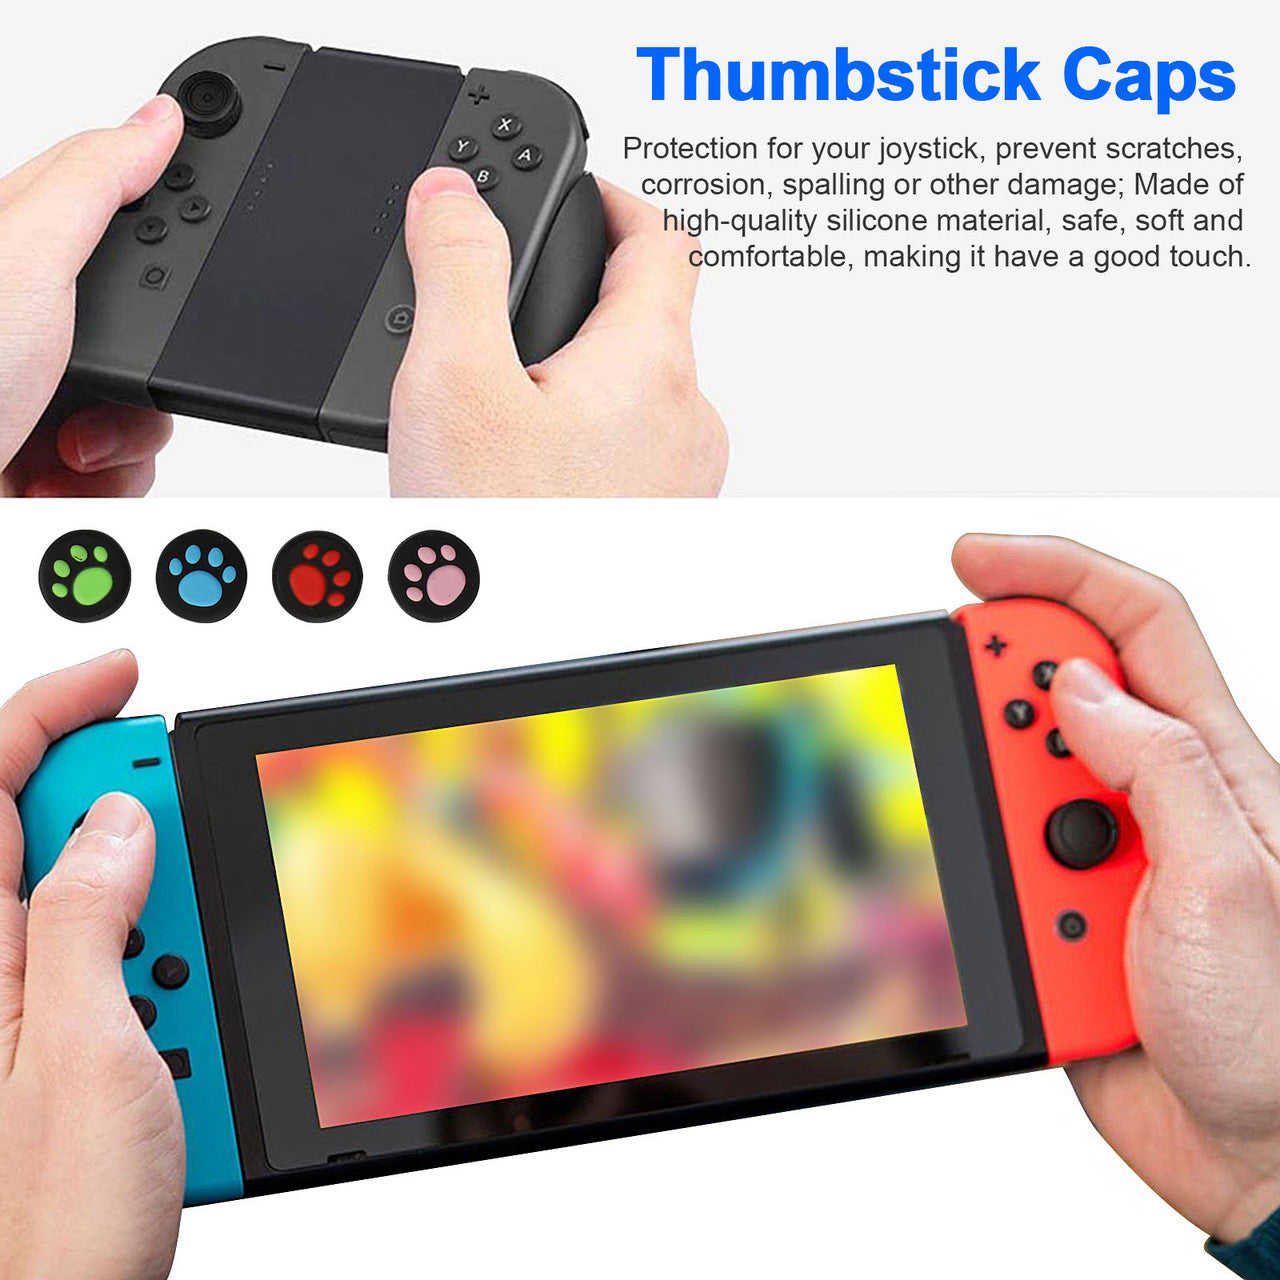 3D Replacement Joystick Analog Thumb Stick for Switch Joy-Con Controller - Switch Replacement Part Repair Kit, Thumbstick Caps / Metal Buckles and Screwdriver Pry Repair Tools for Nintendo Joycons